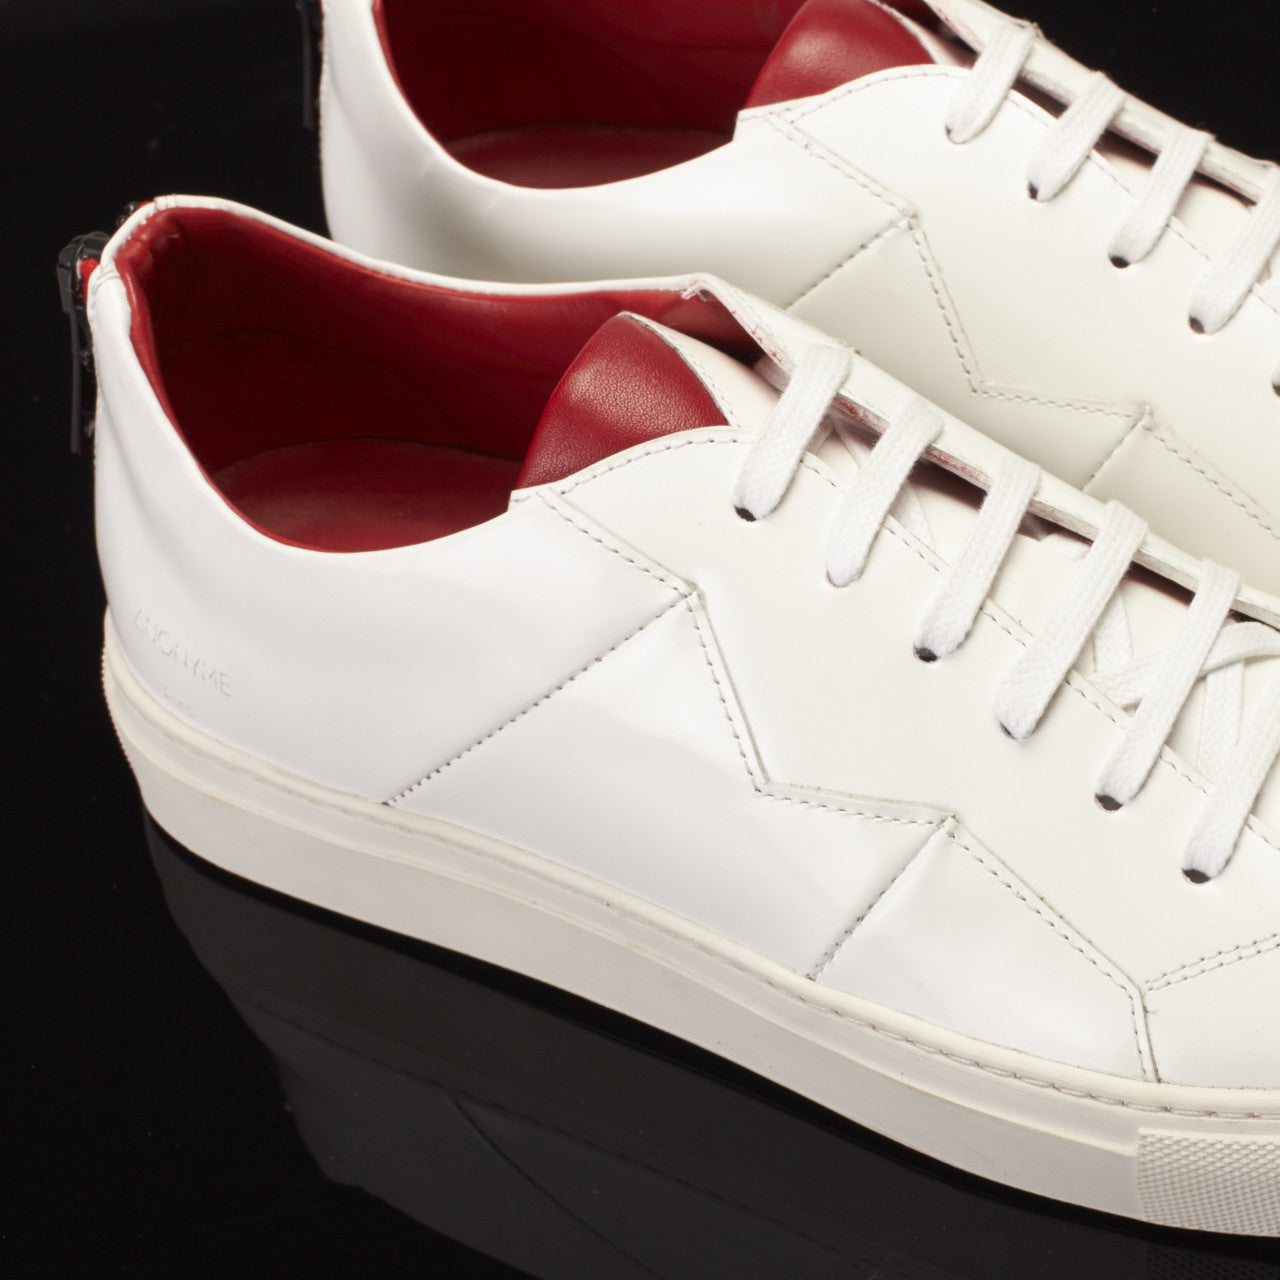 Palads peber kig ind Vali Luxury Sneakers in White Spazzolato by Anonyme Paris - La Perfection  Louis